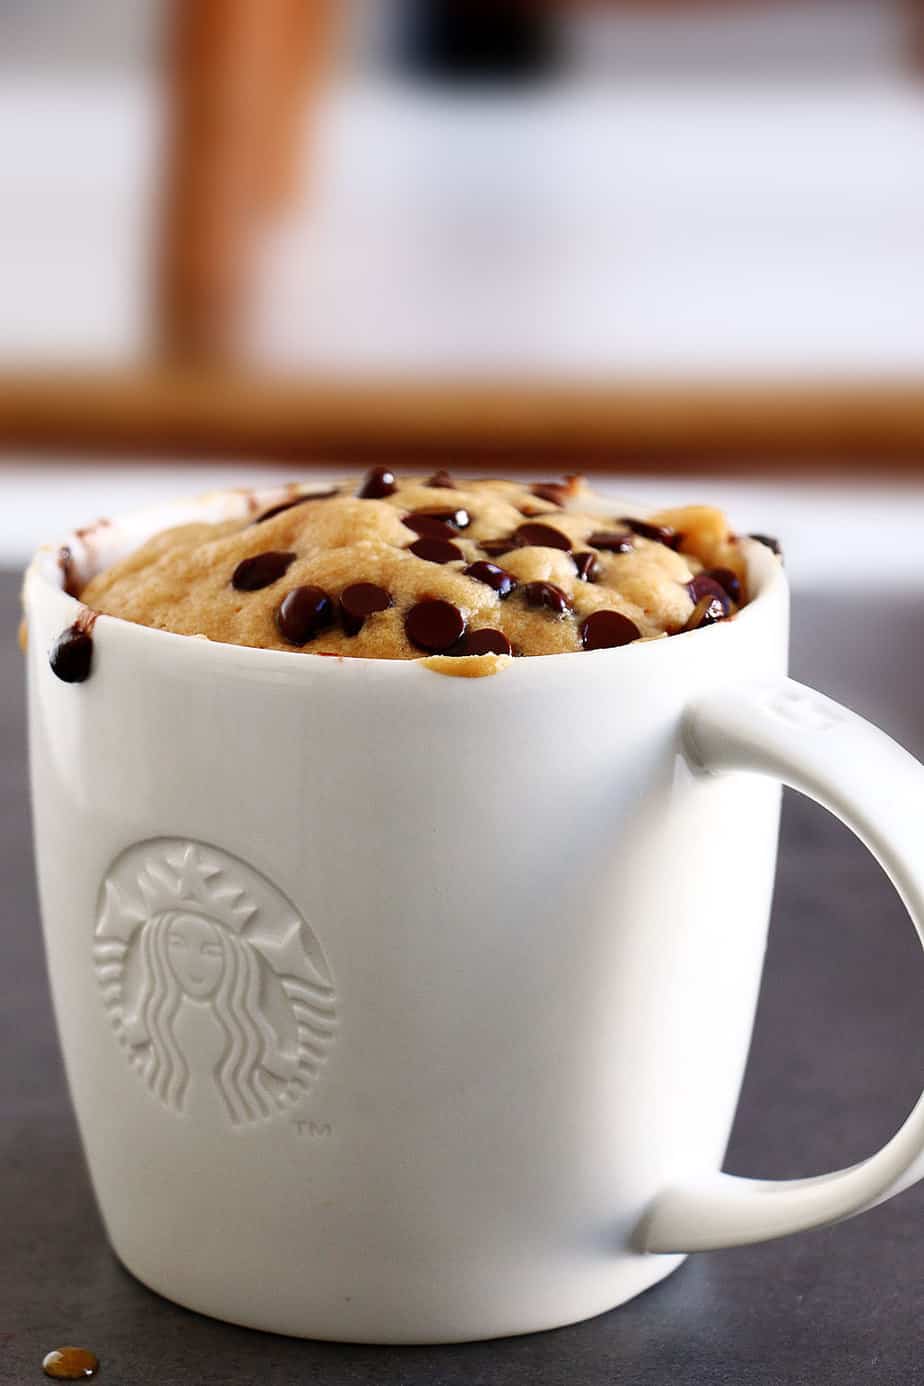 A cake in a white mug with chocolate chips.